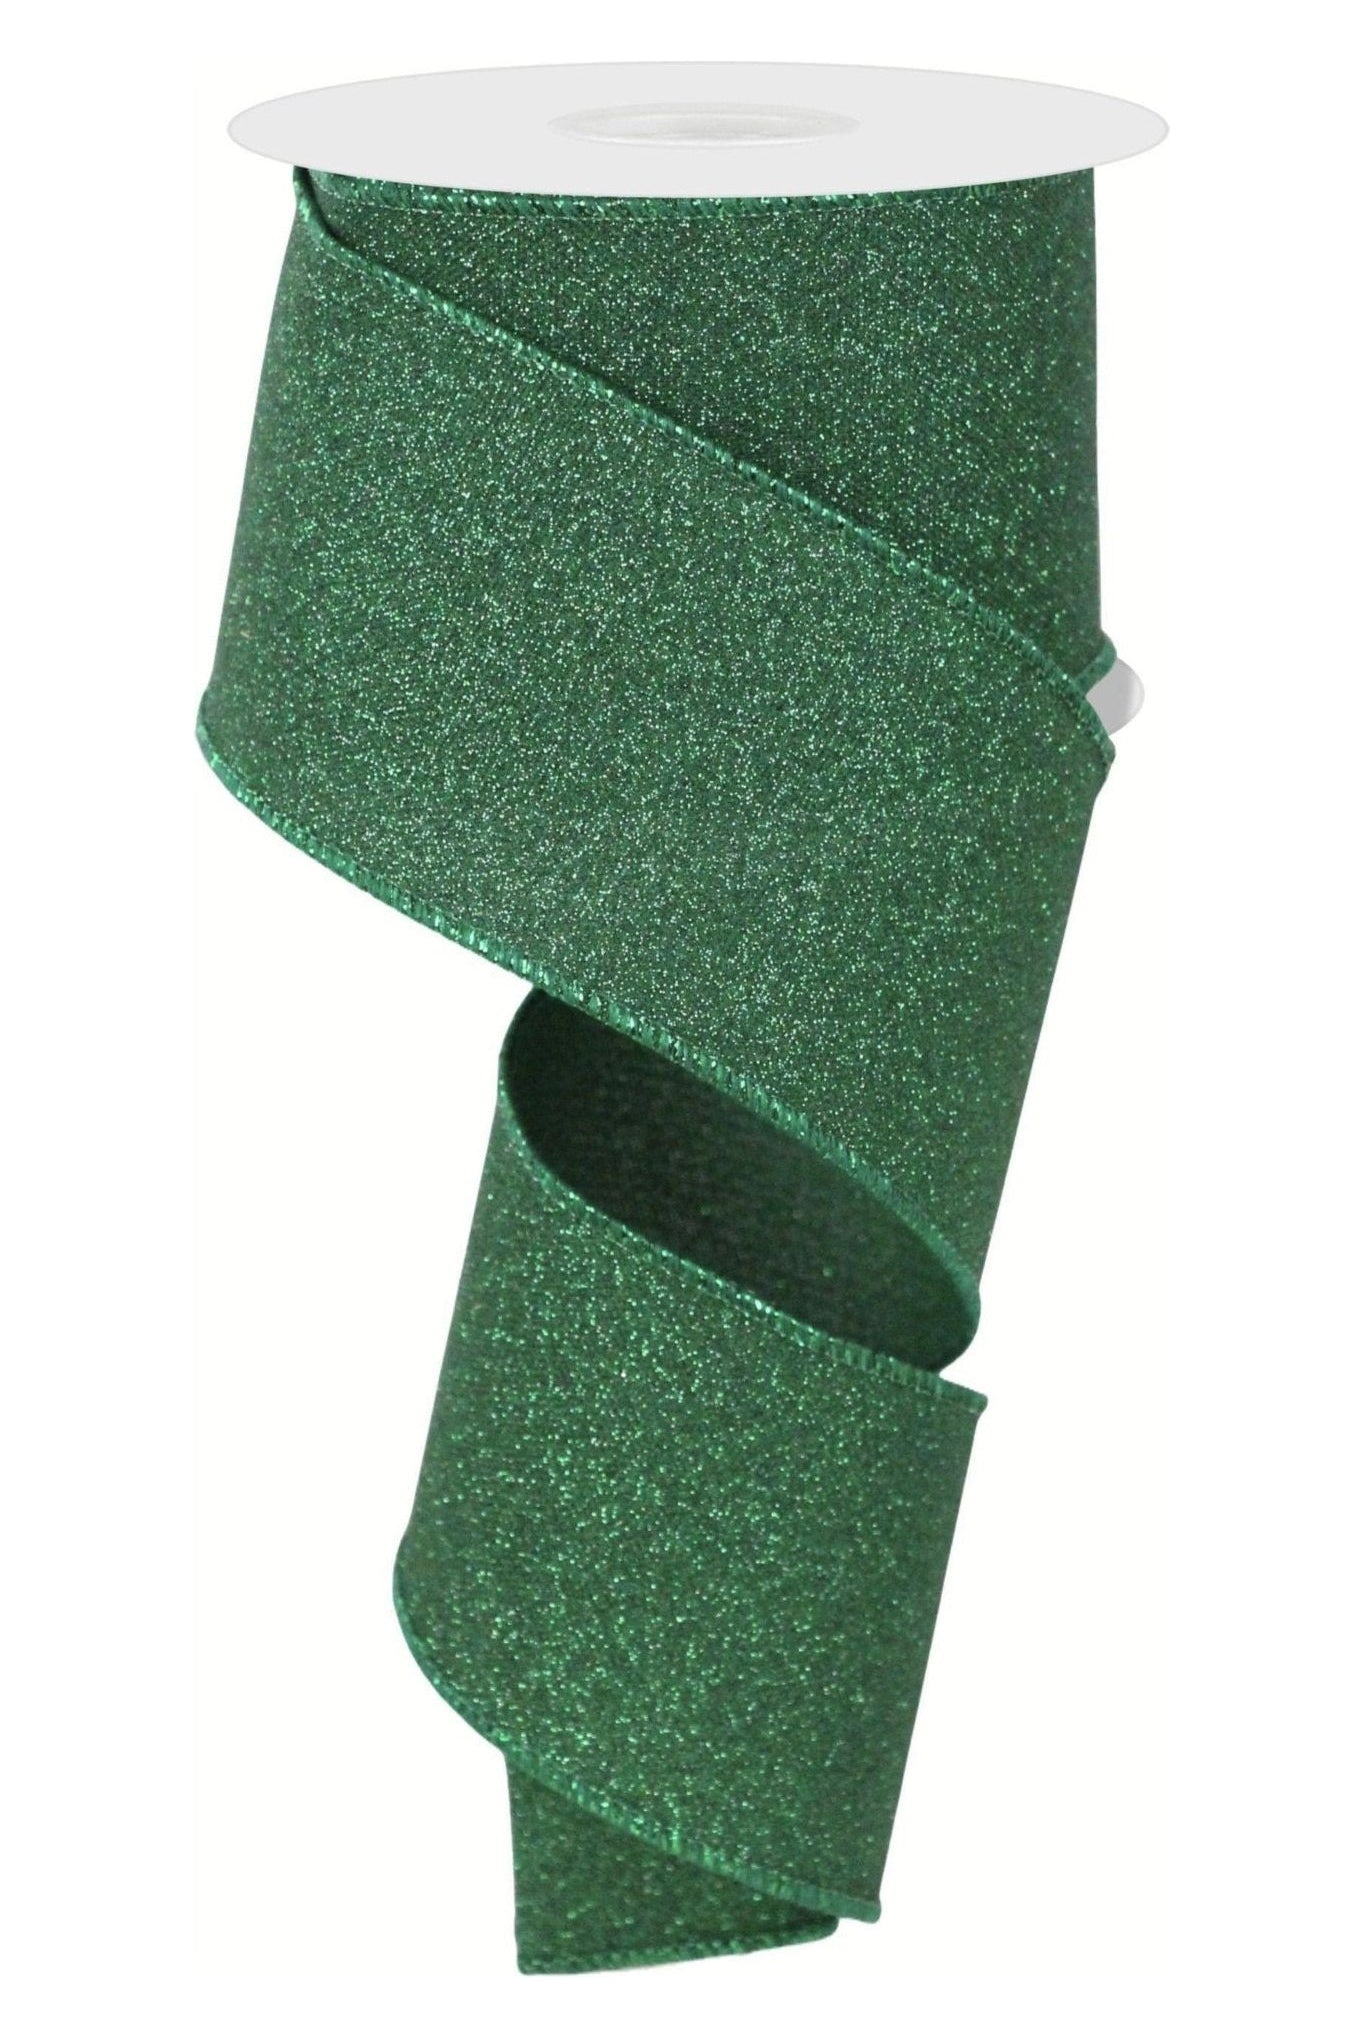 Shop For 2.5" Fine Glitter On Faux Royal: Emerald Green (10 Yards) RGE179006